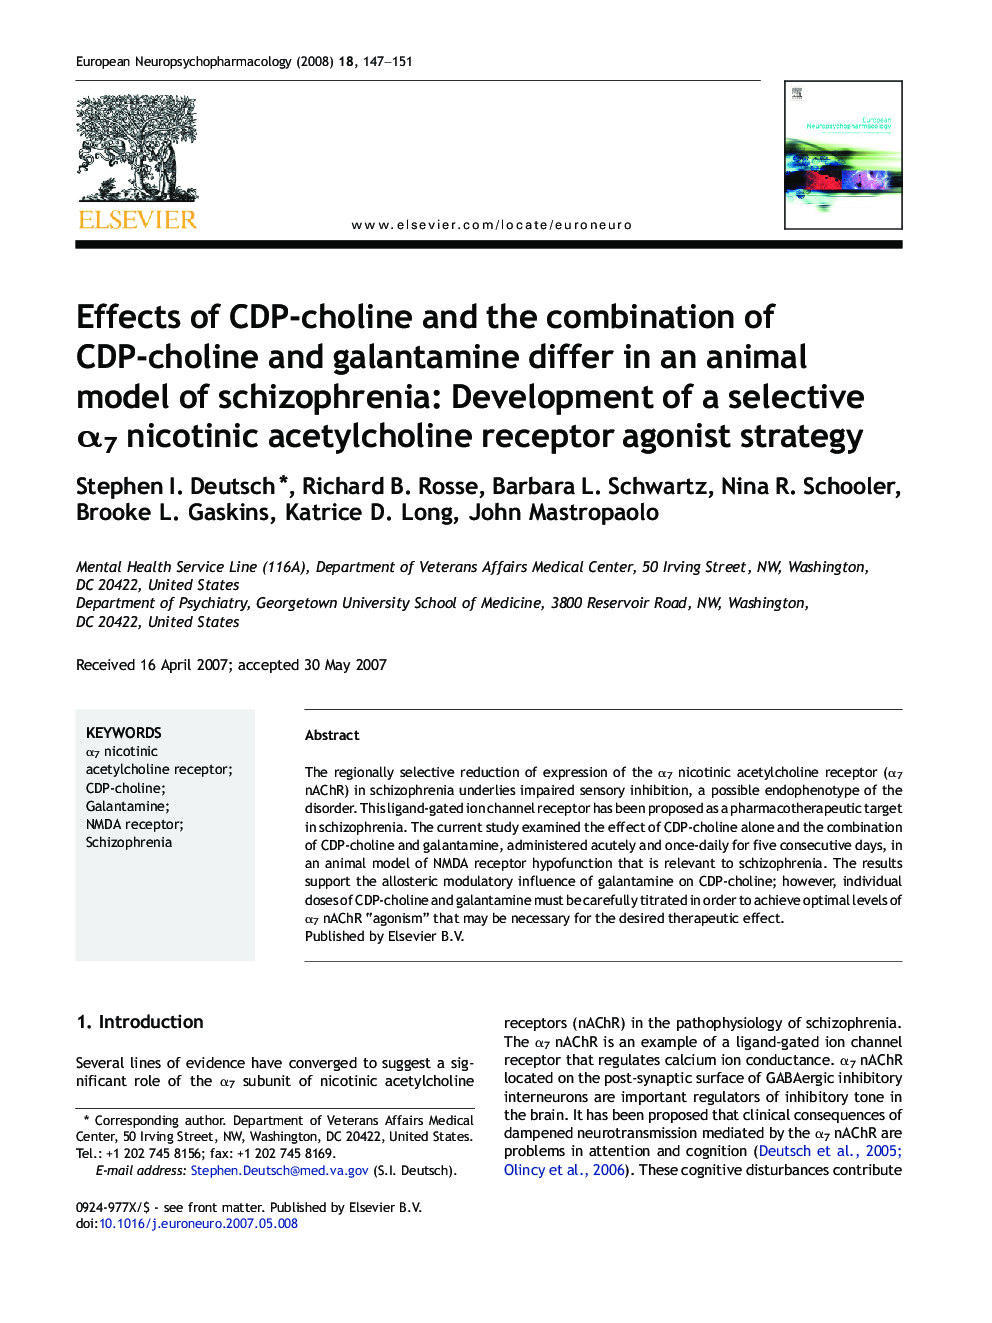 Effects of CDP-choline and the combination of CDP-choline and galantamine differ in an animal model of schizophrenia: Development of a selective α7 nicotinic acetylcholine receptor agonist strategy